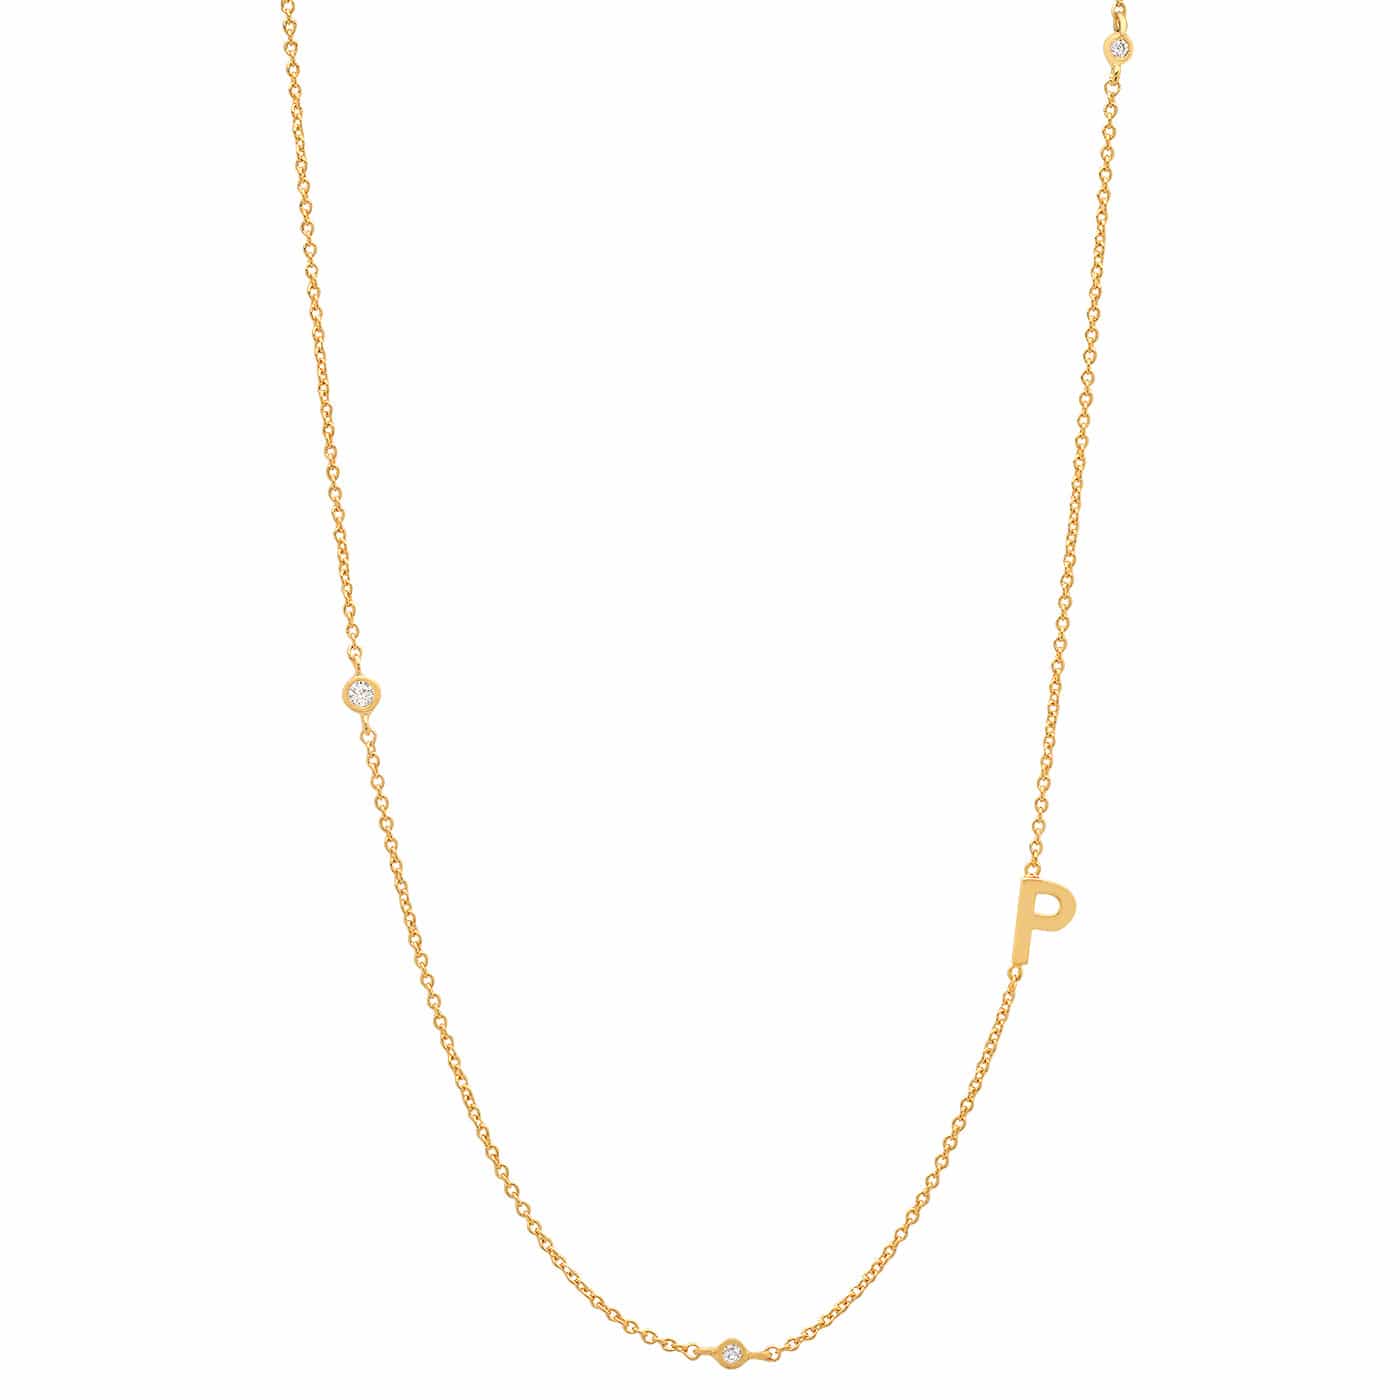 TAI JEWELRY Necklace P Sideways Initial Gold Necklace With CZ Accents